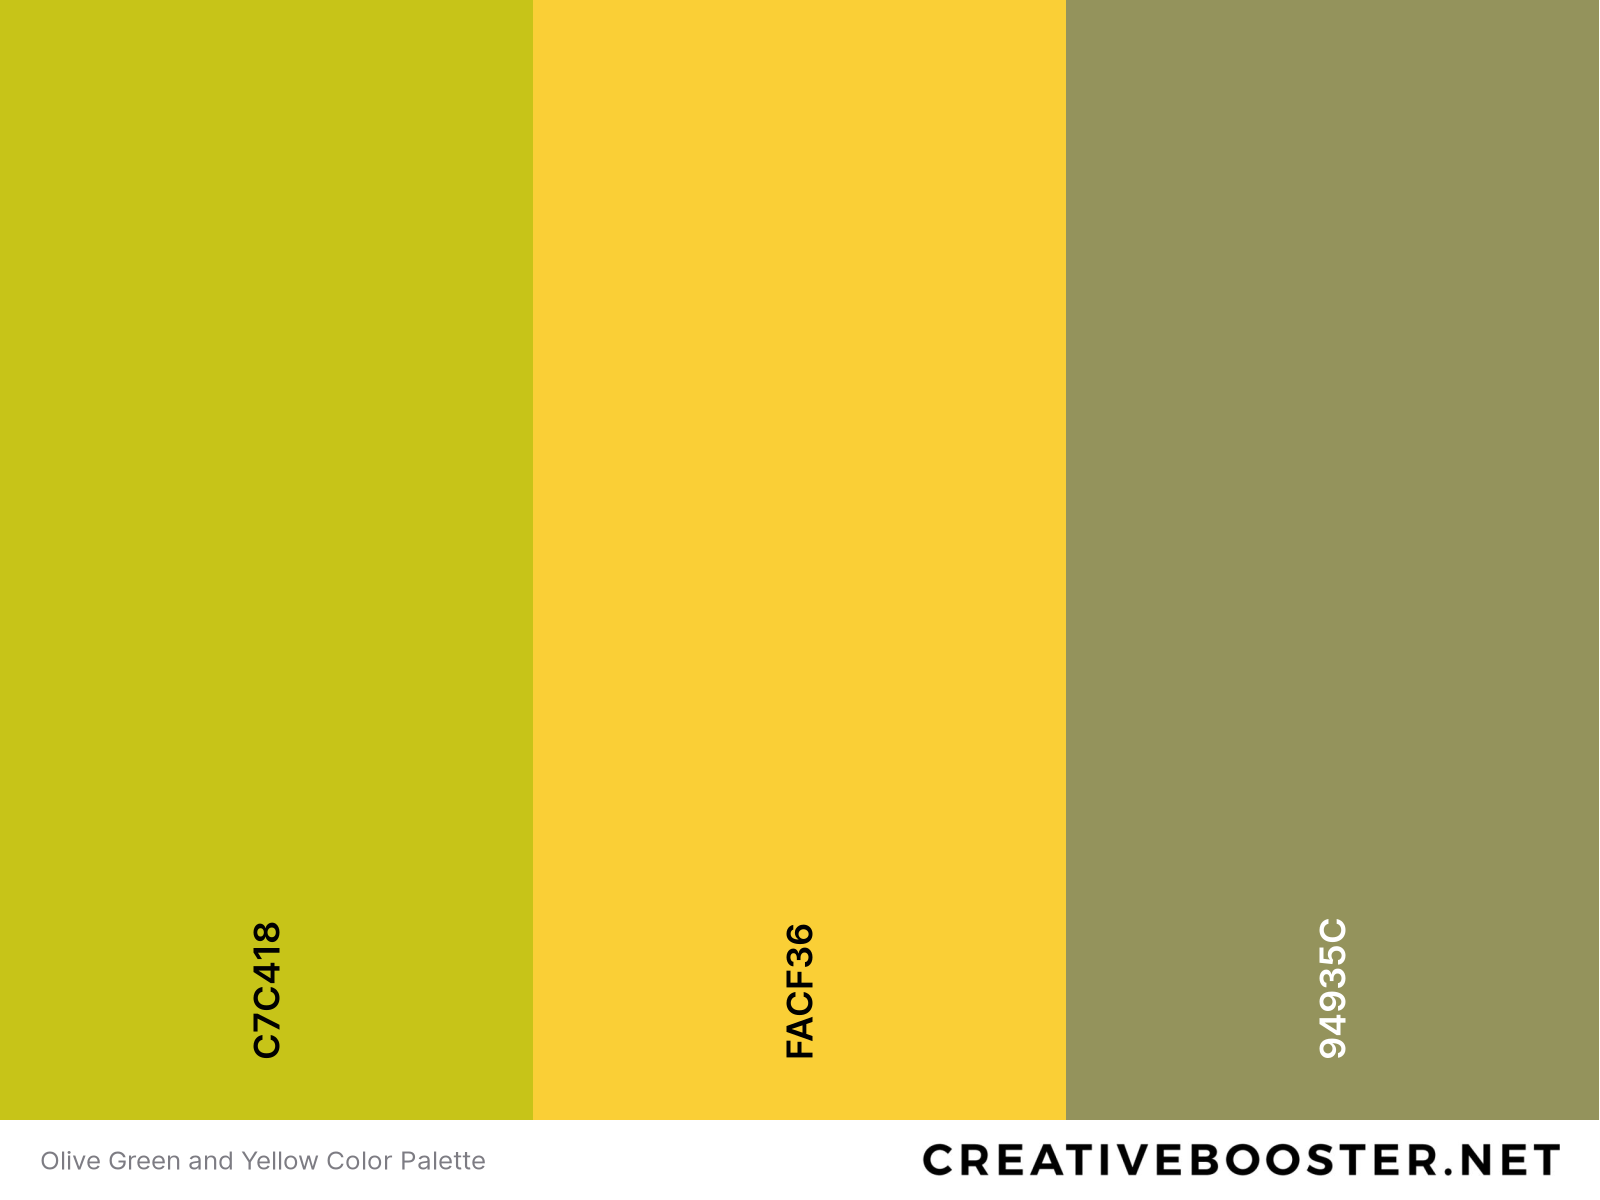 Olive Green and Yellow Color Palette